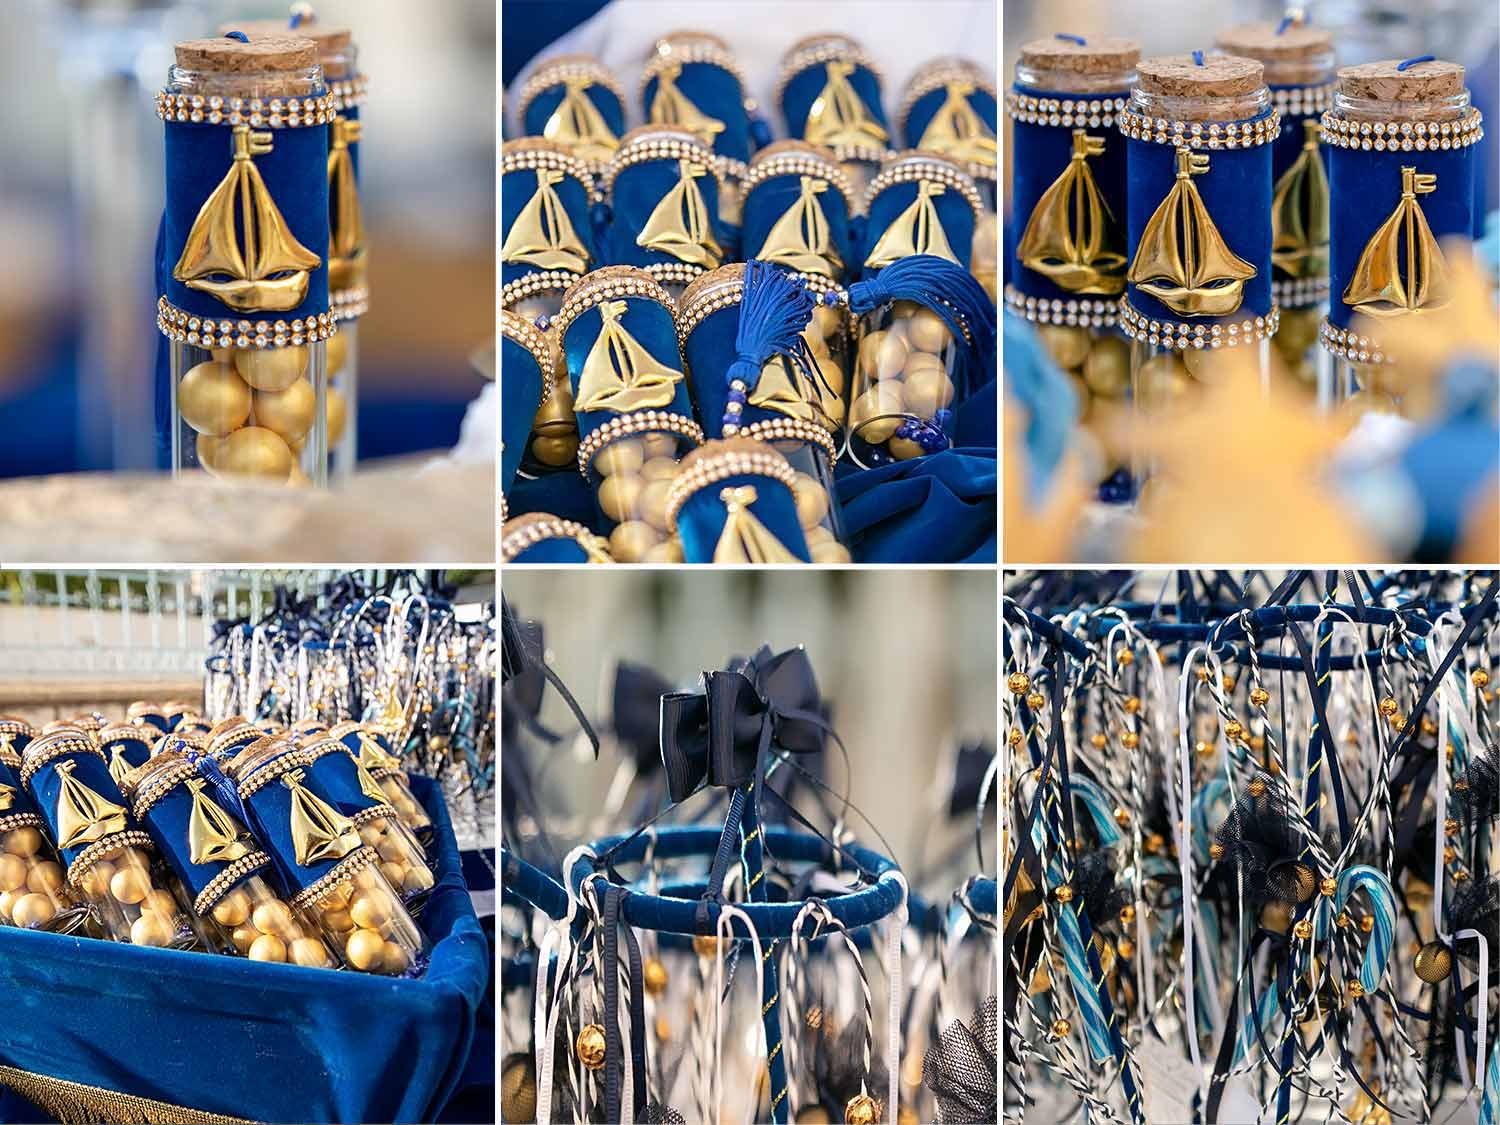 A cylinder glass baptism favor with a gold boat on top for the adult guests and a handmade stick carousel with gold boats and candy for the children